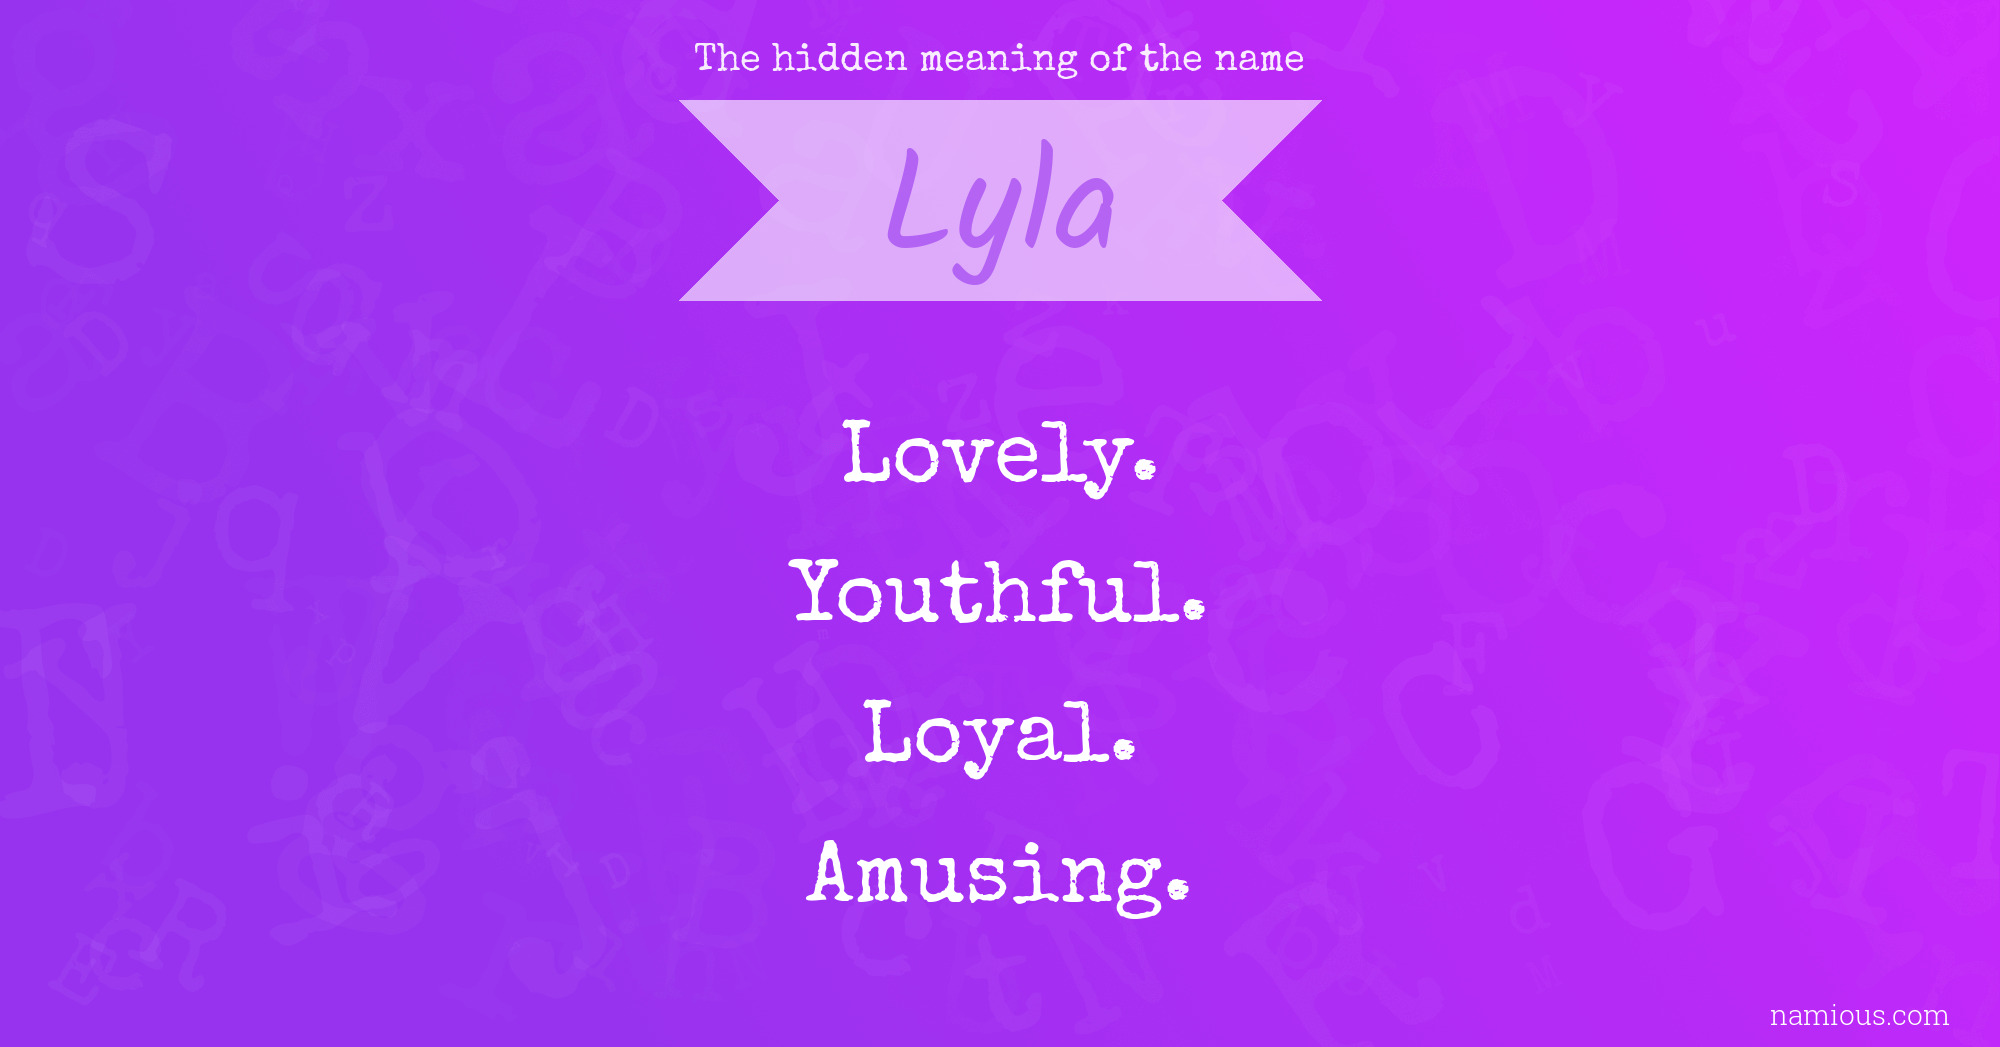 The hidden meaning of the name Lyla | Namious